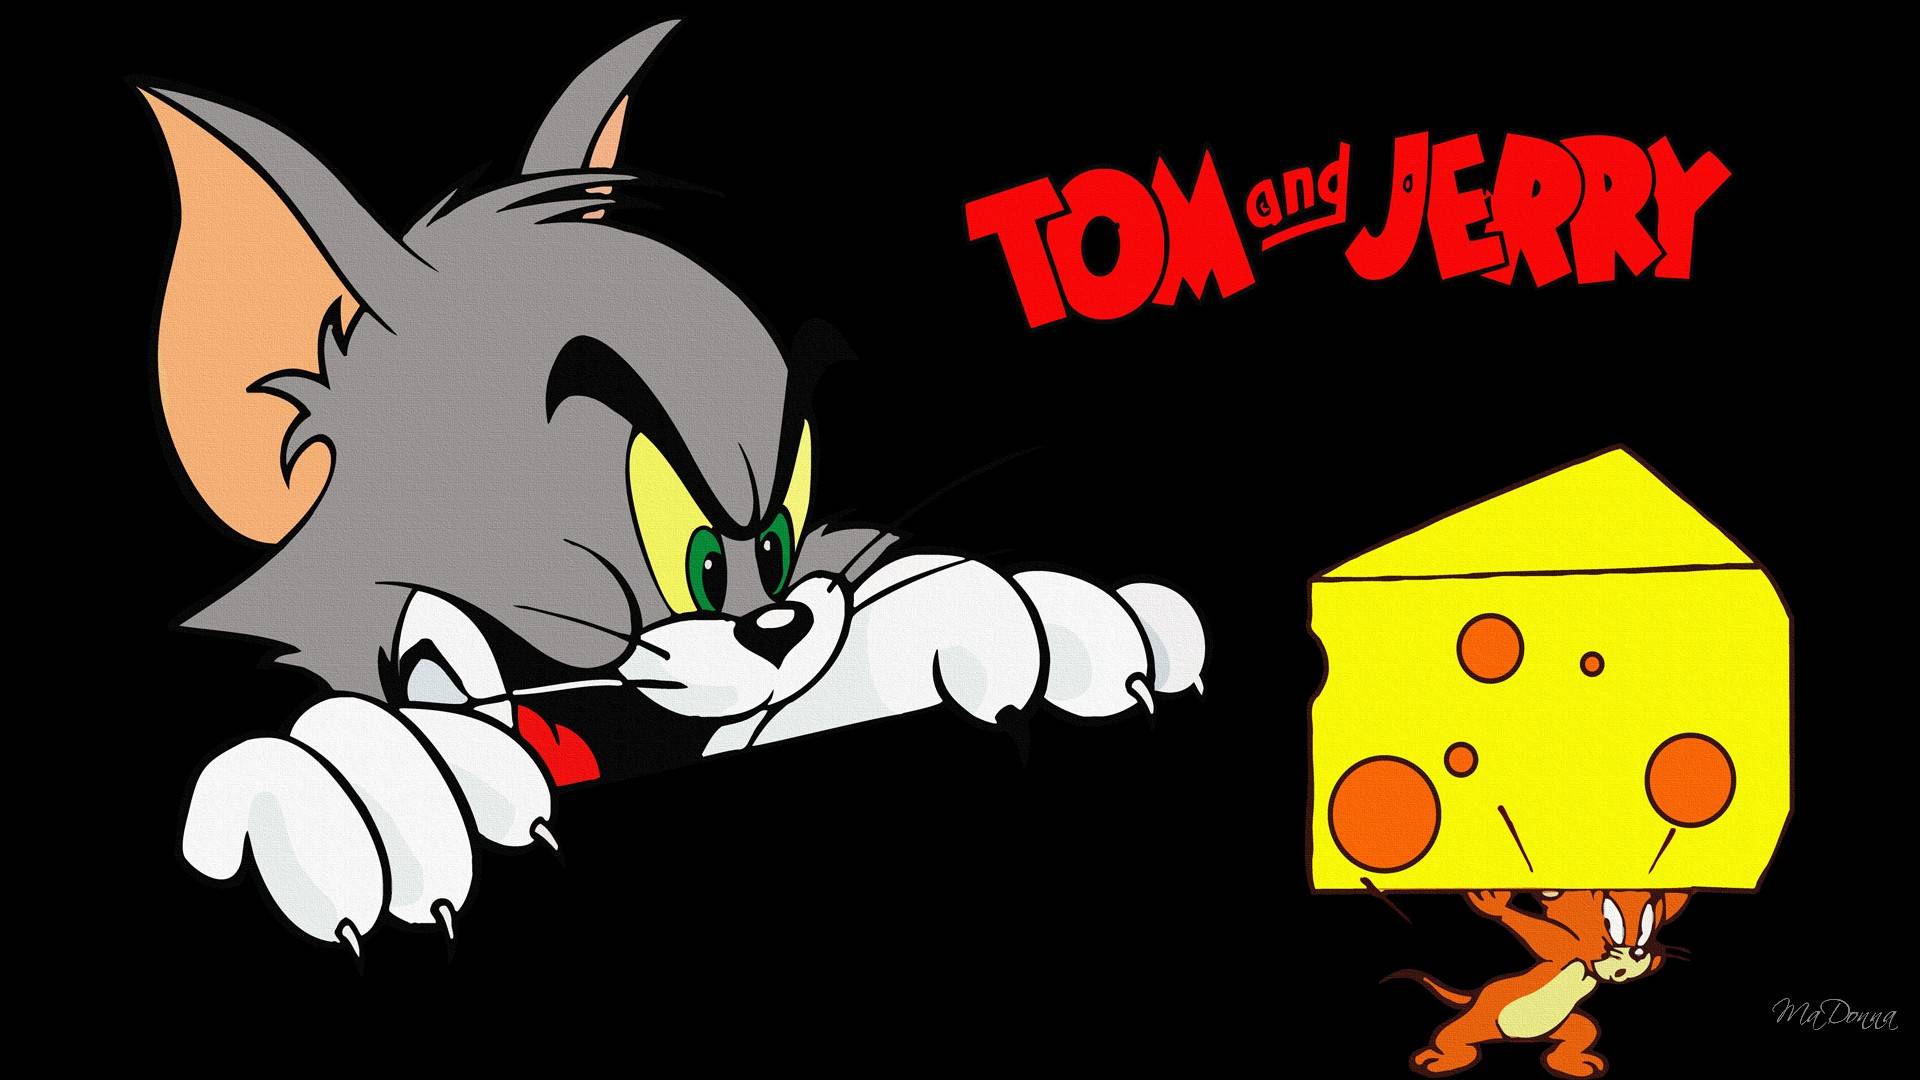 Puss Tom And Mouse Jerry Cartoon Hd Wallpaper For Desktop 1920x1080 :  